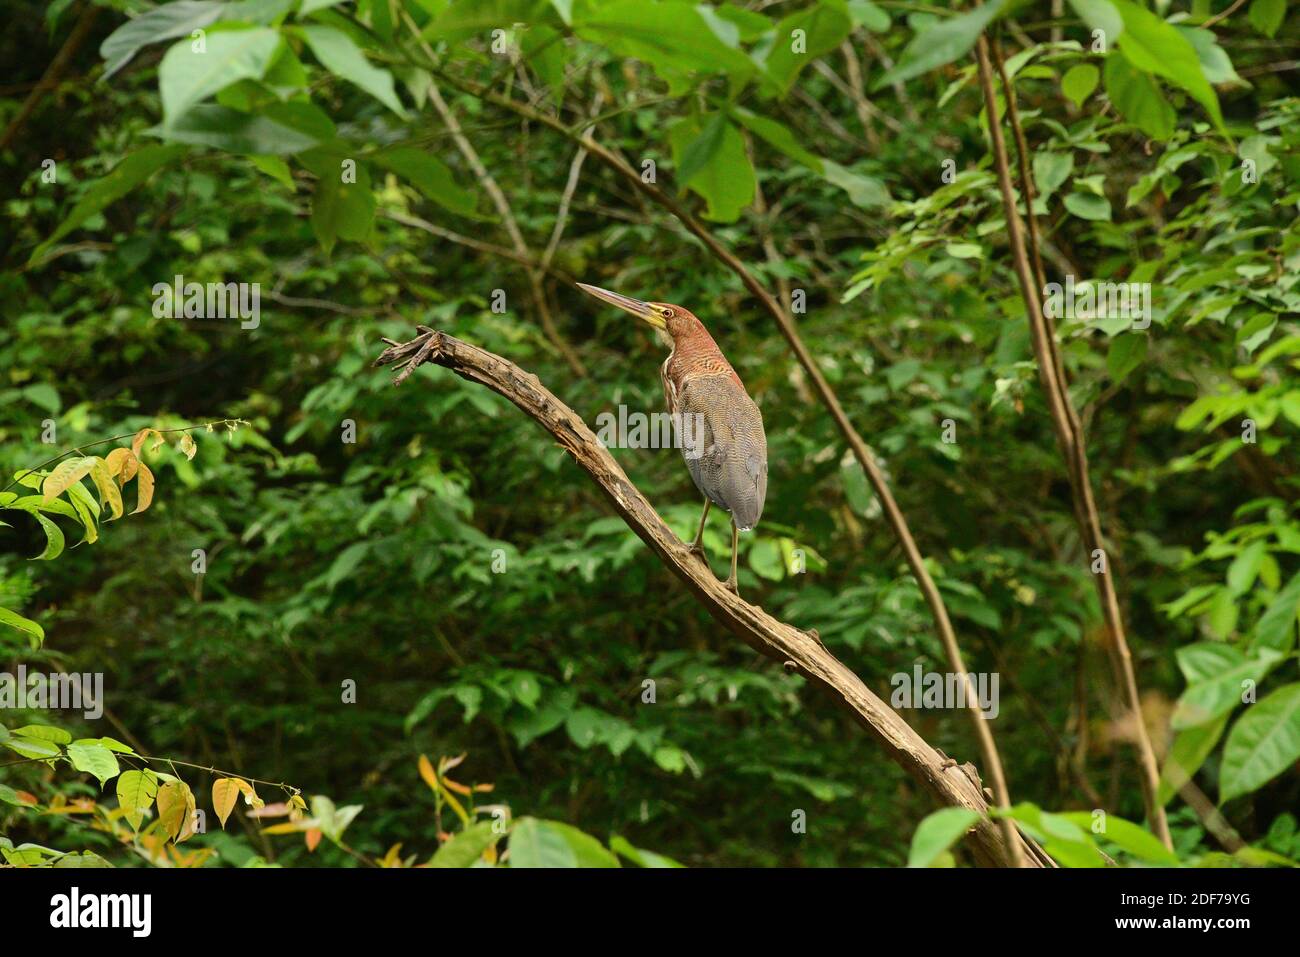 Rufescent tiger heron (Tigrisoma lineatum) is a kind of heron native to Central and South America. This photo was taken near Manaus, Brazil. Stock Photo